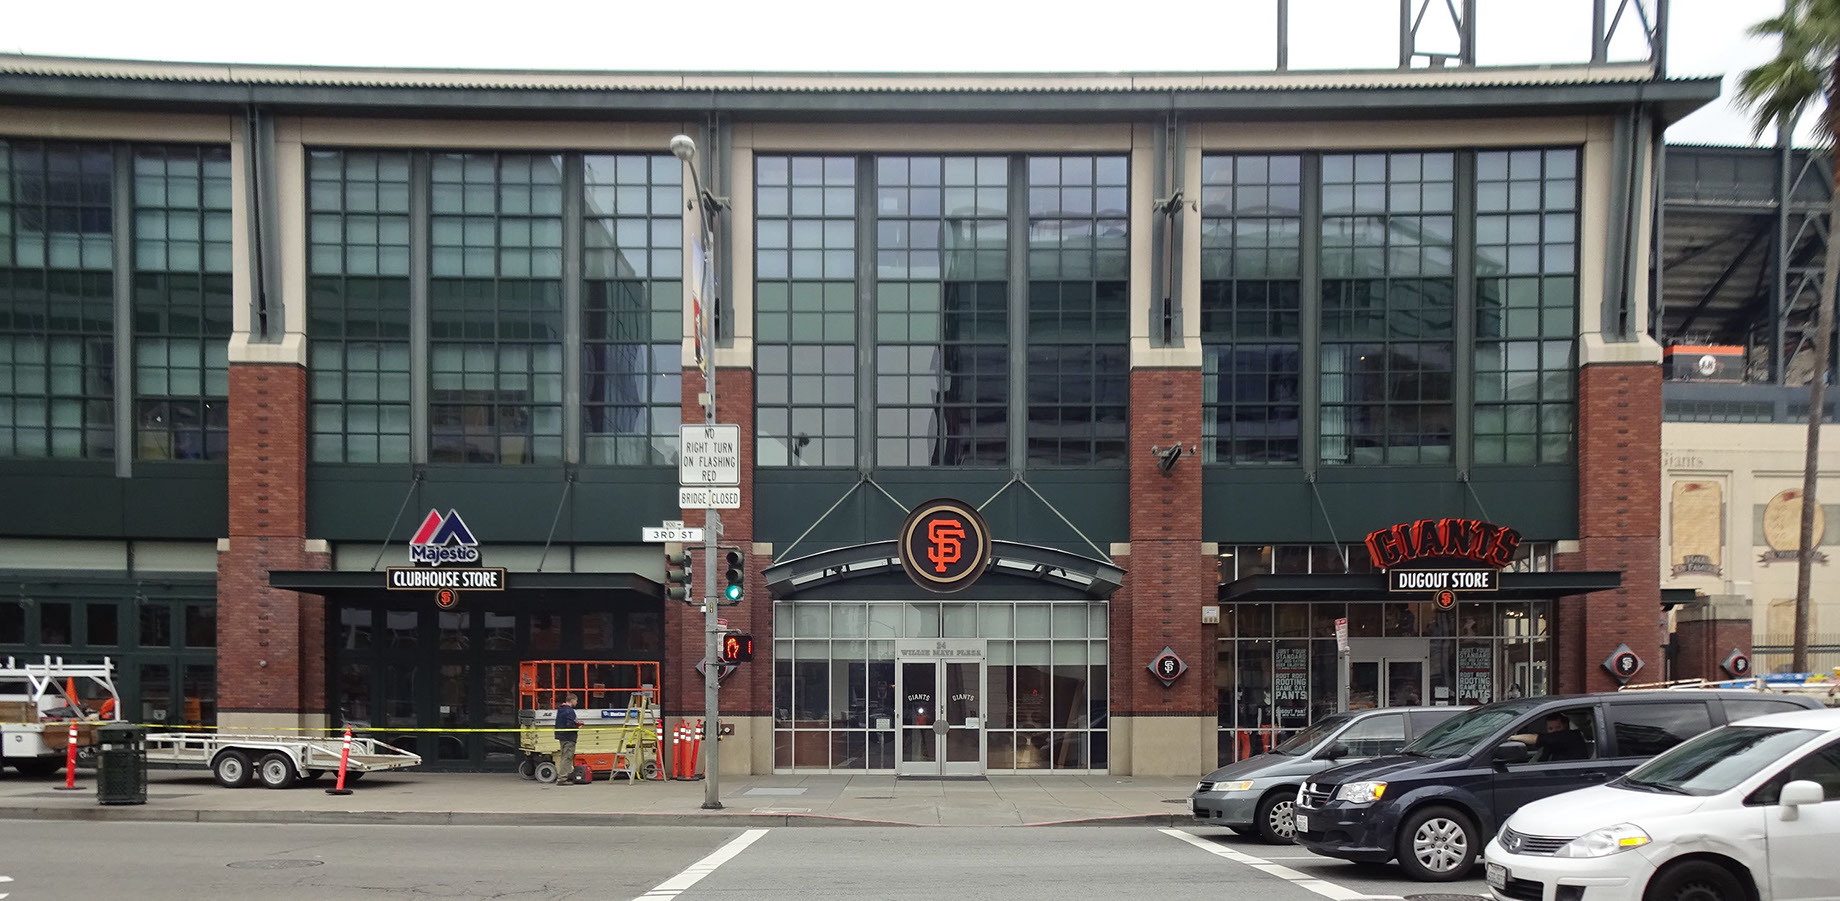 SF Giants / AT&T Park